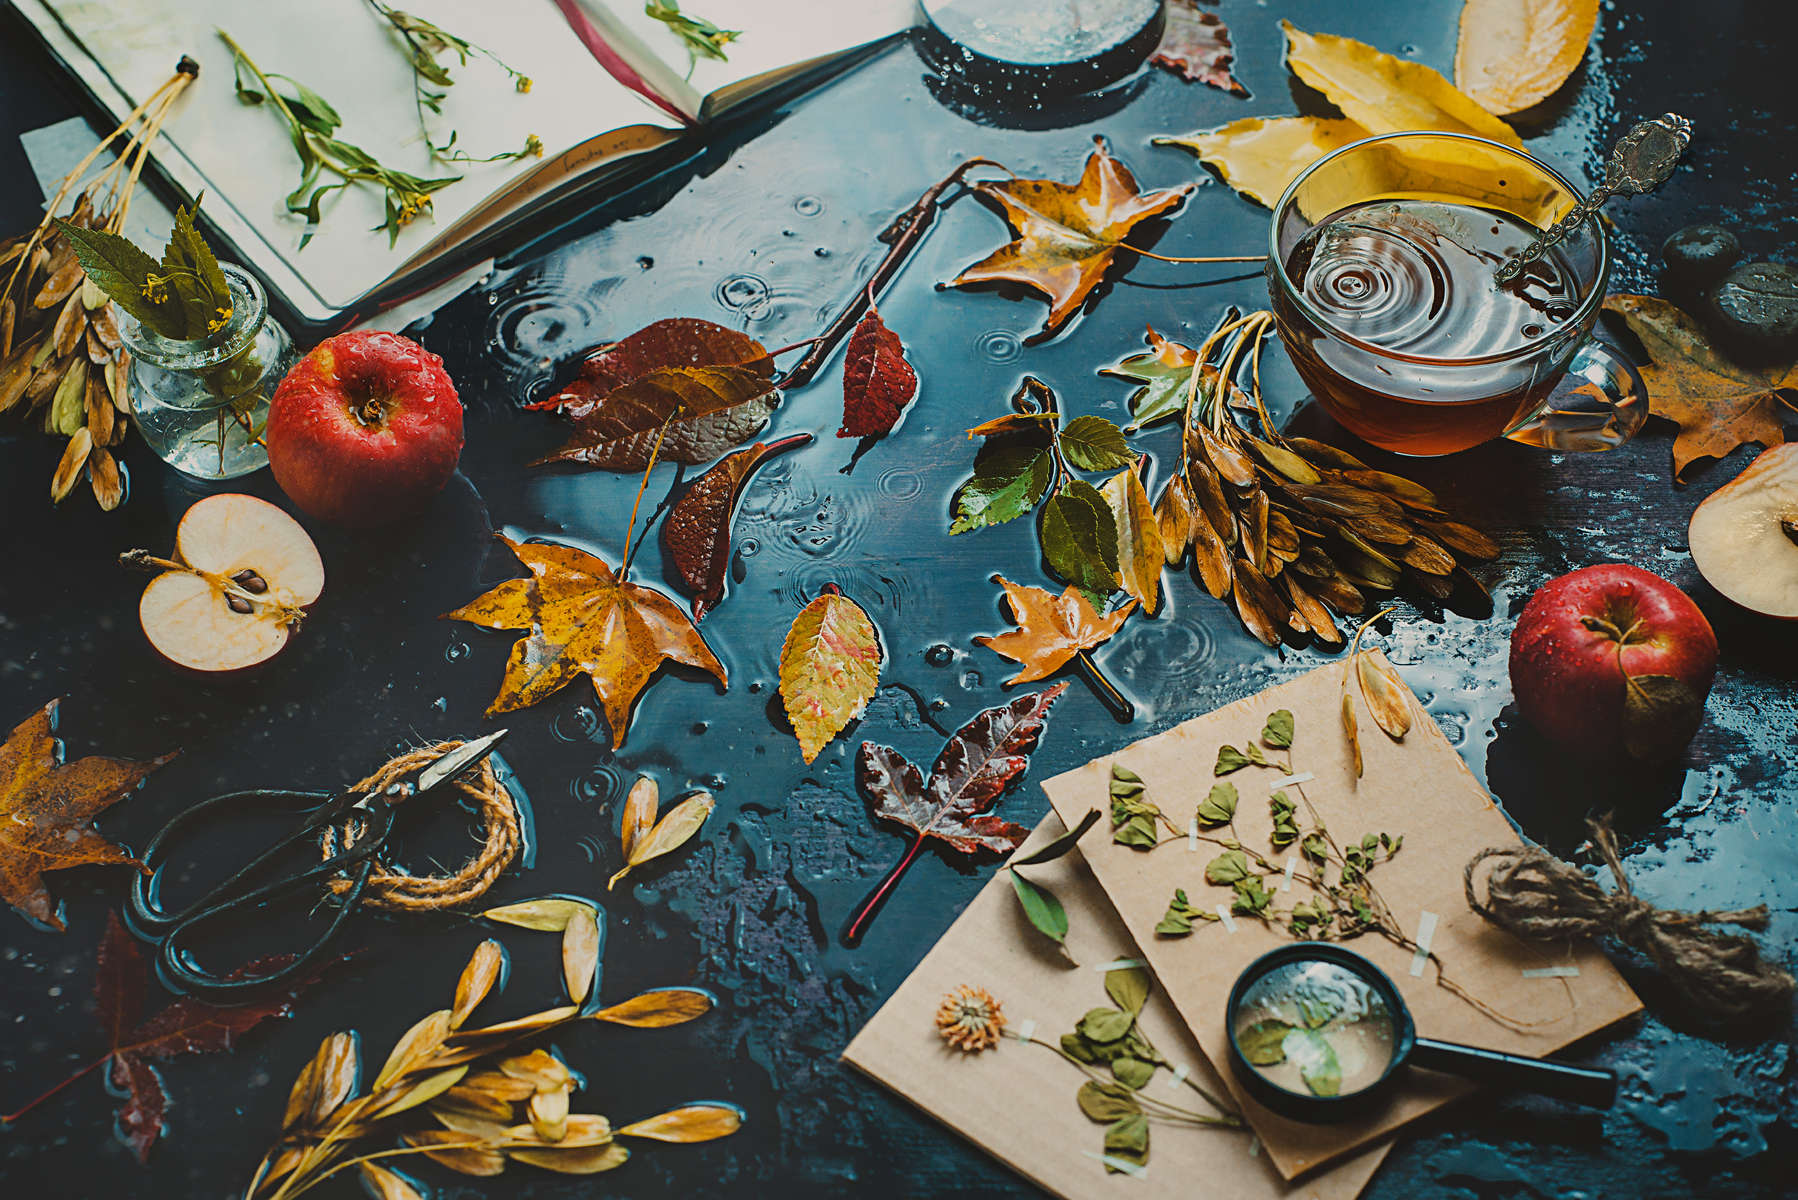 Tutorial: How to Make it Rain on Your Still Life in the Studio